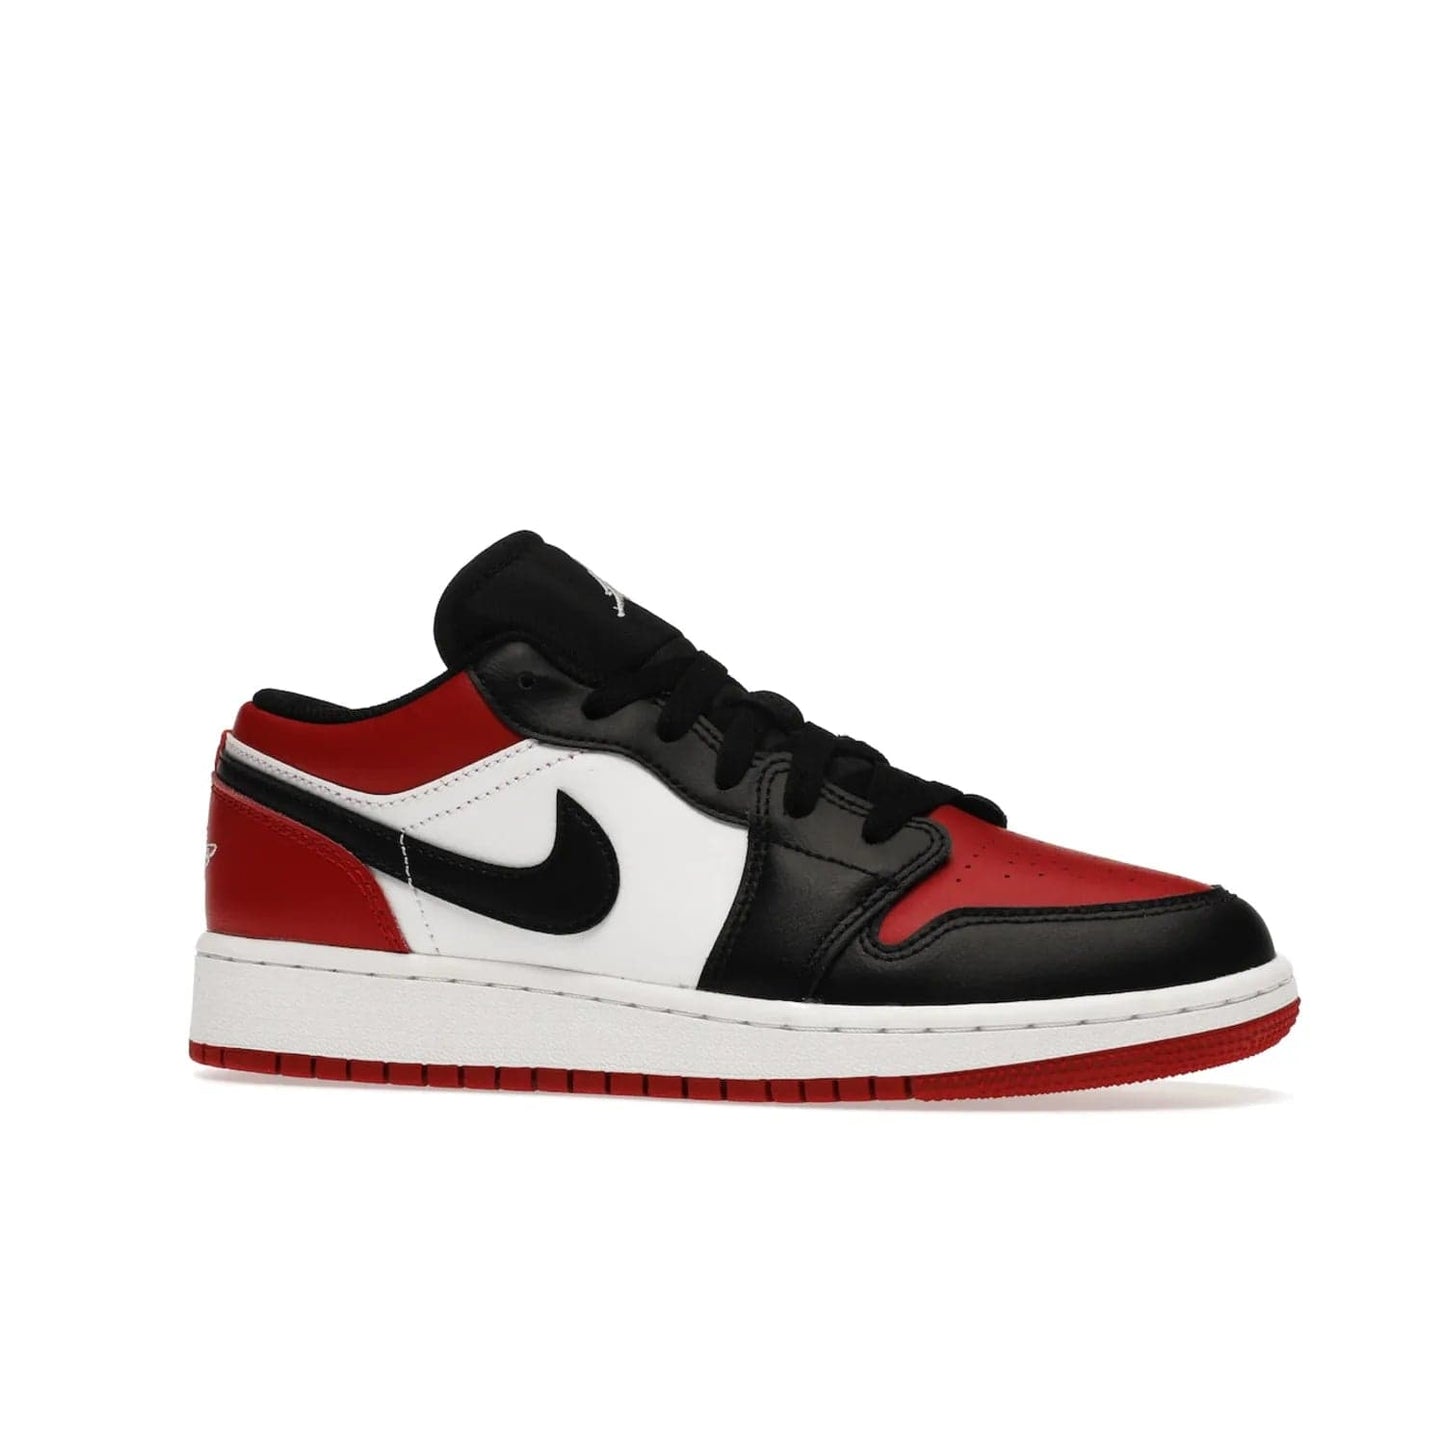 Jordan 1 Low Bred Toe (GS) - Image 3 - Only at www.BallersClubKickz.com - #
Iconic sneaker from Jordan brand with classic colorway, unique detailing & Air Jordan Wings logo. Step into the shoes of the greats with the Jordan 1 Low Bred Toe GS!